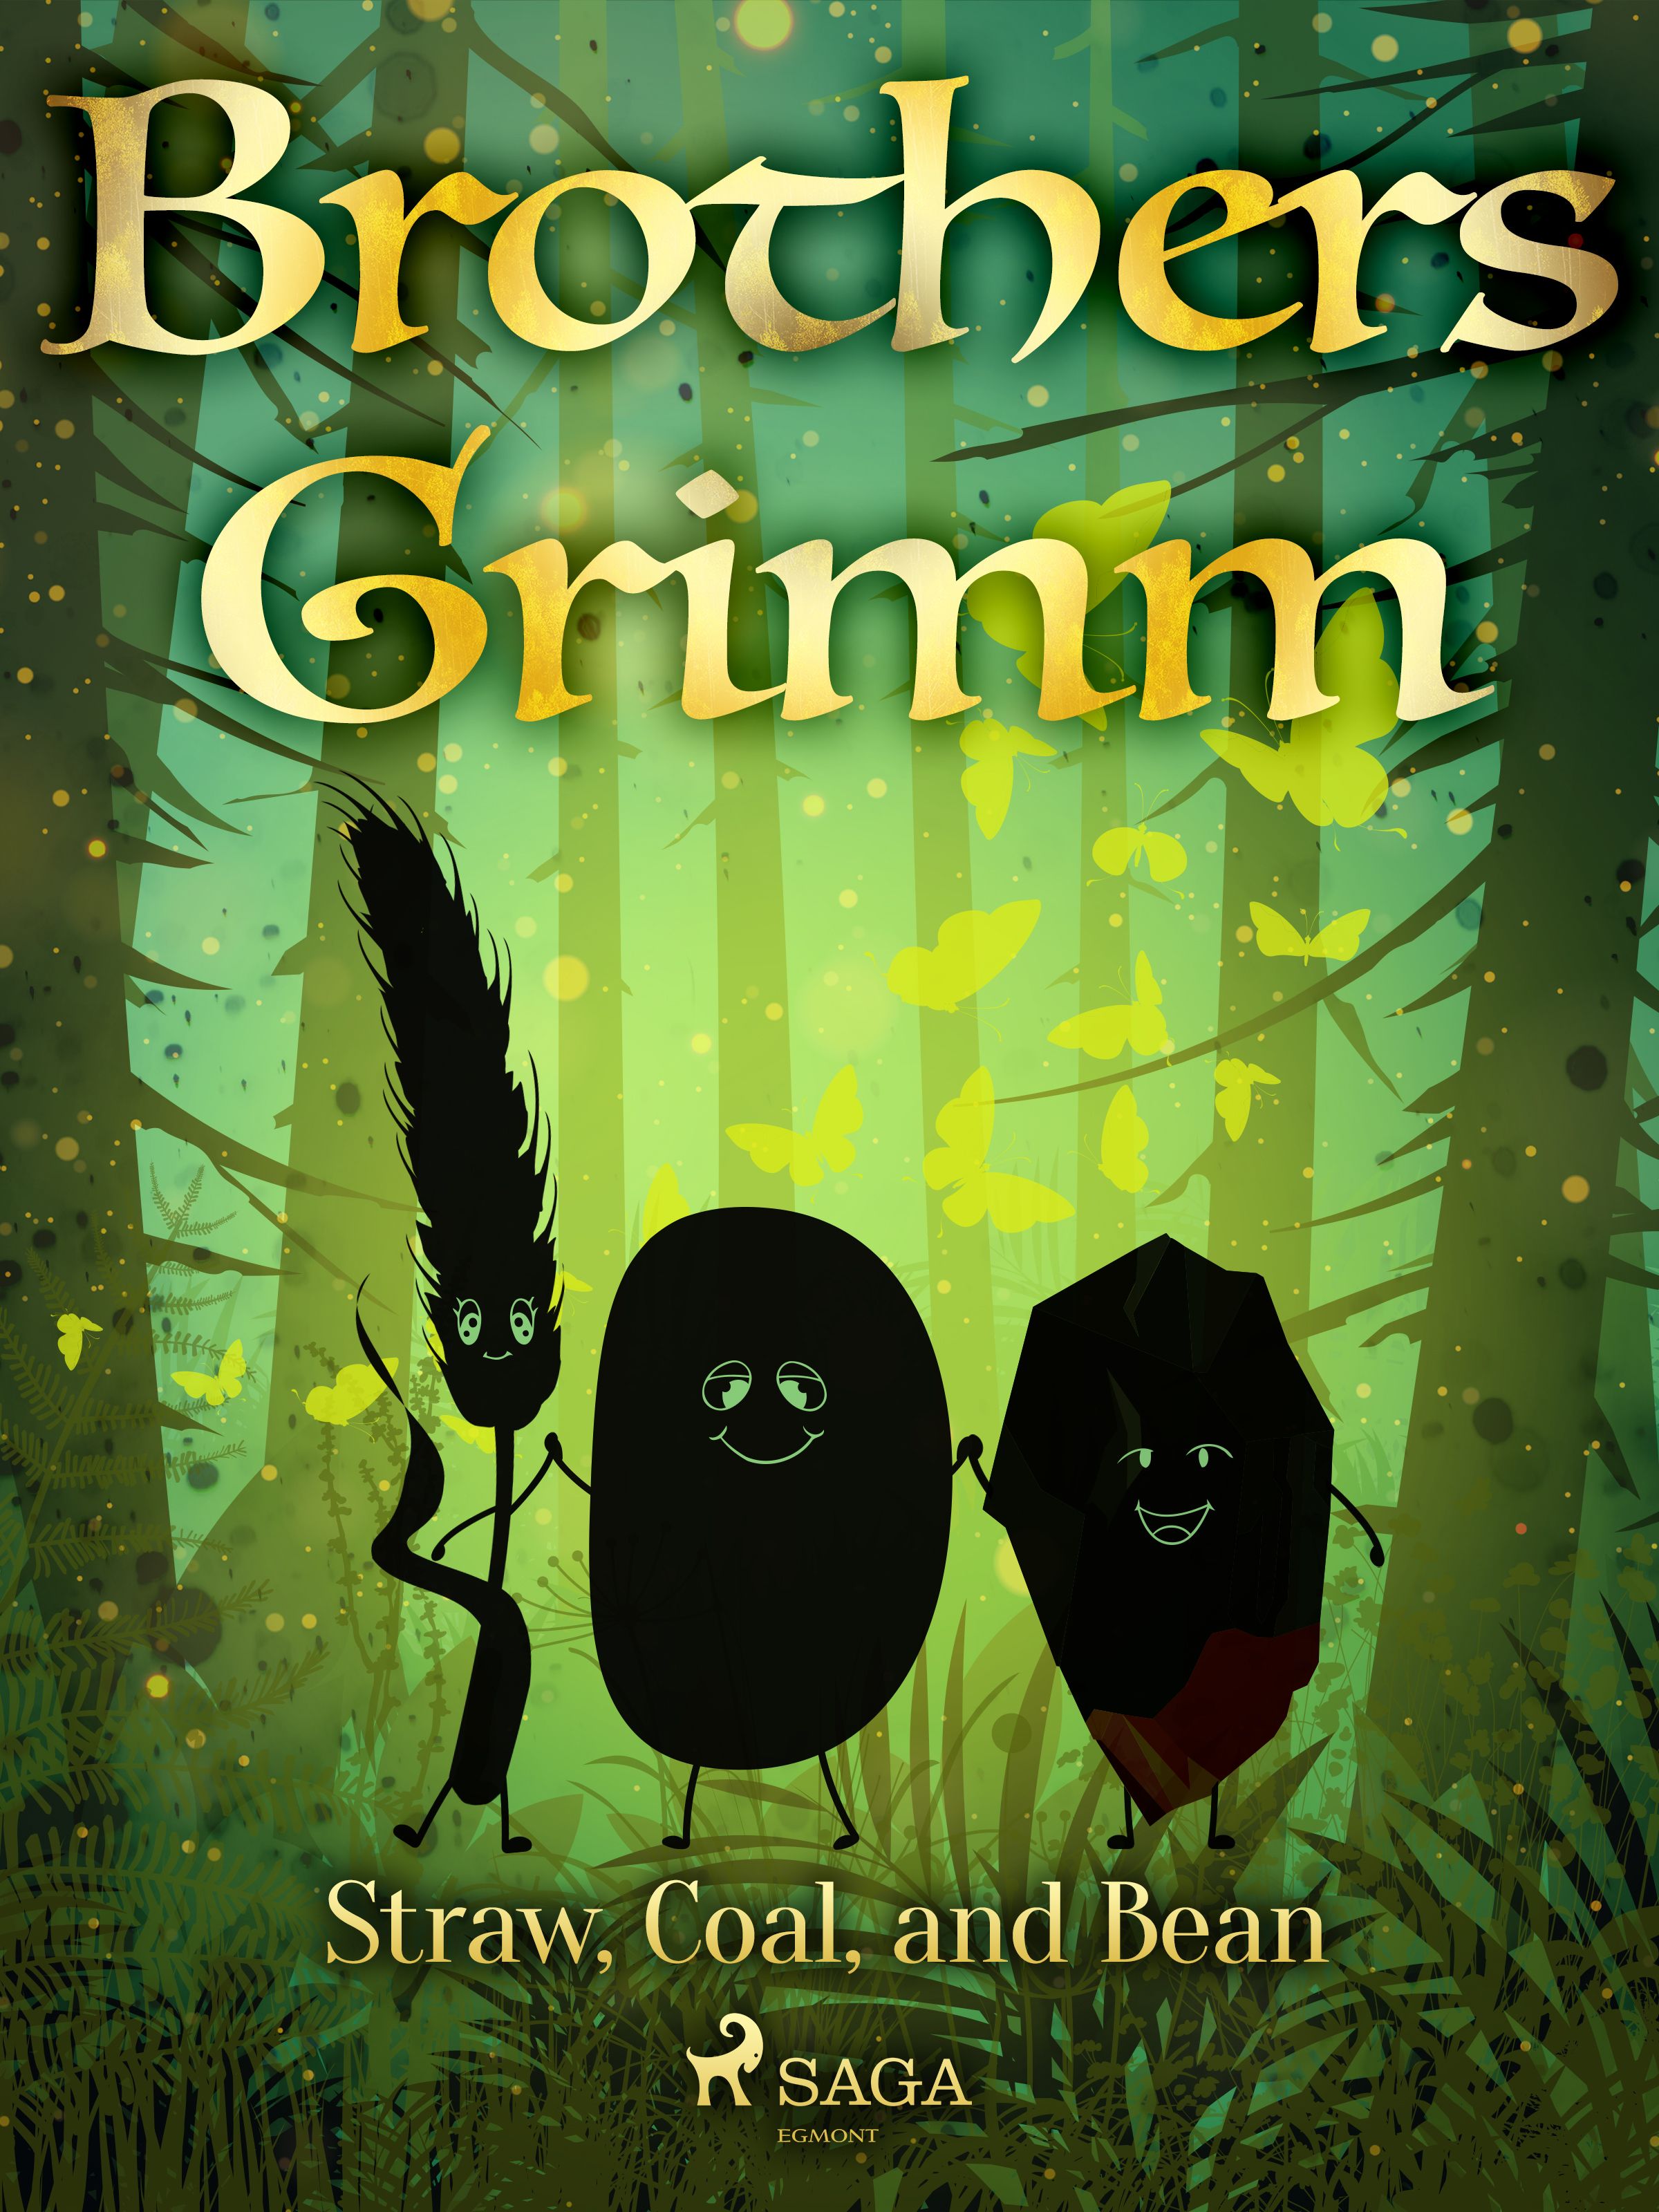 Straw, Coal, and Bean, eBook by Brothers Grimm